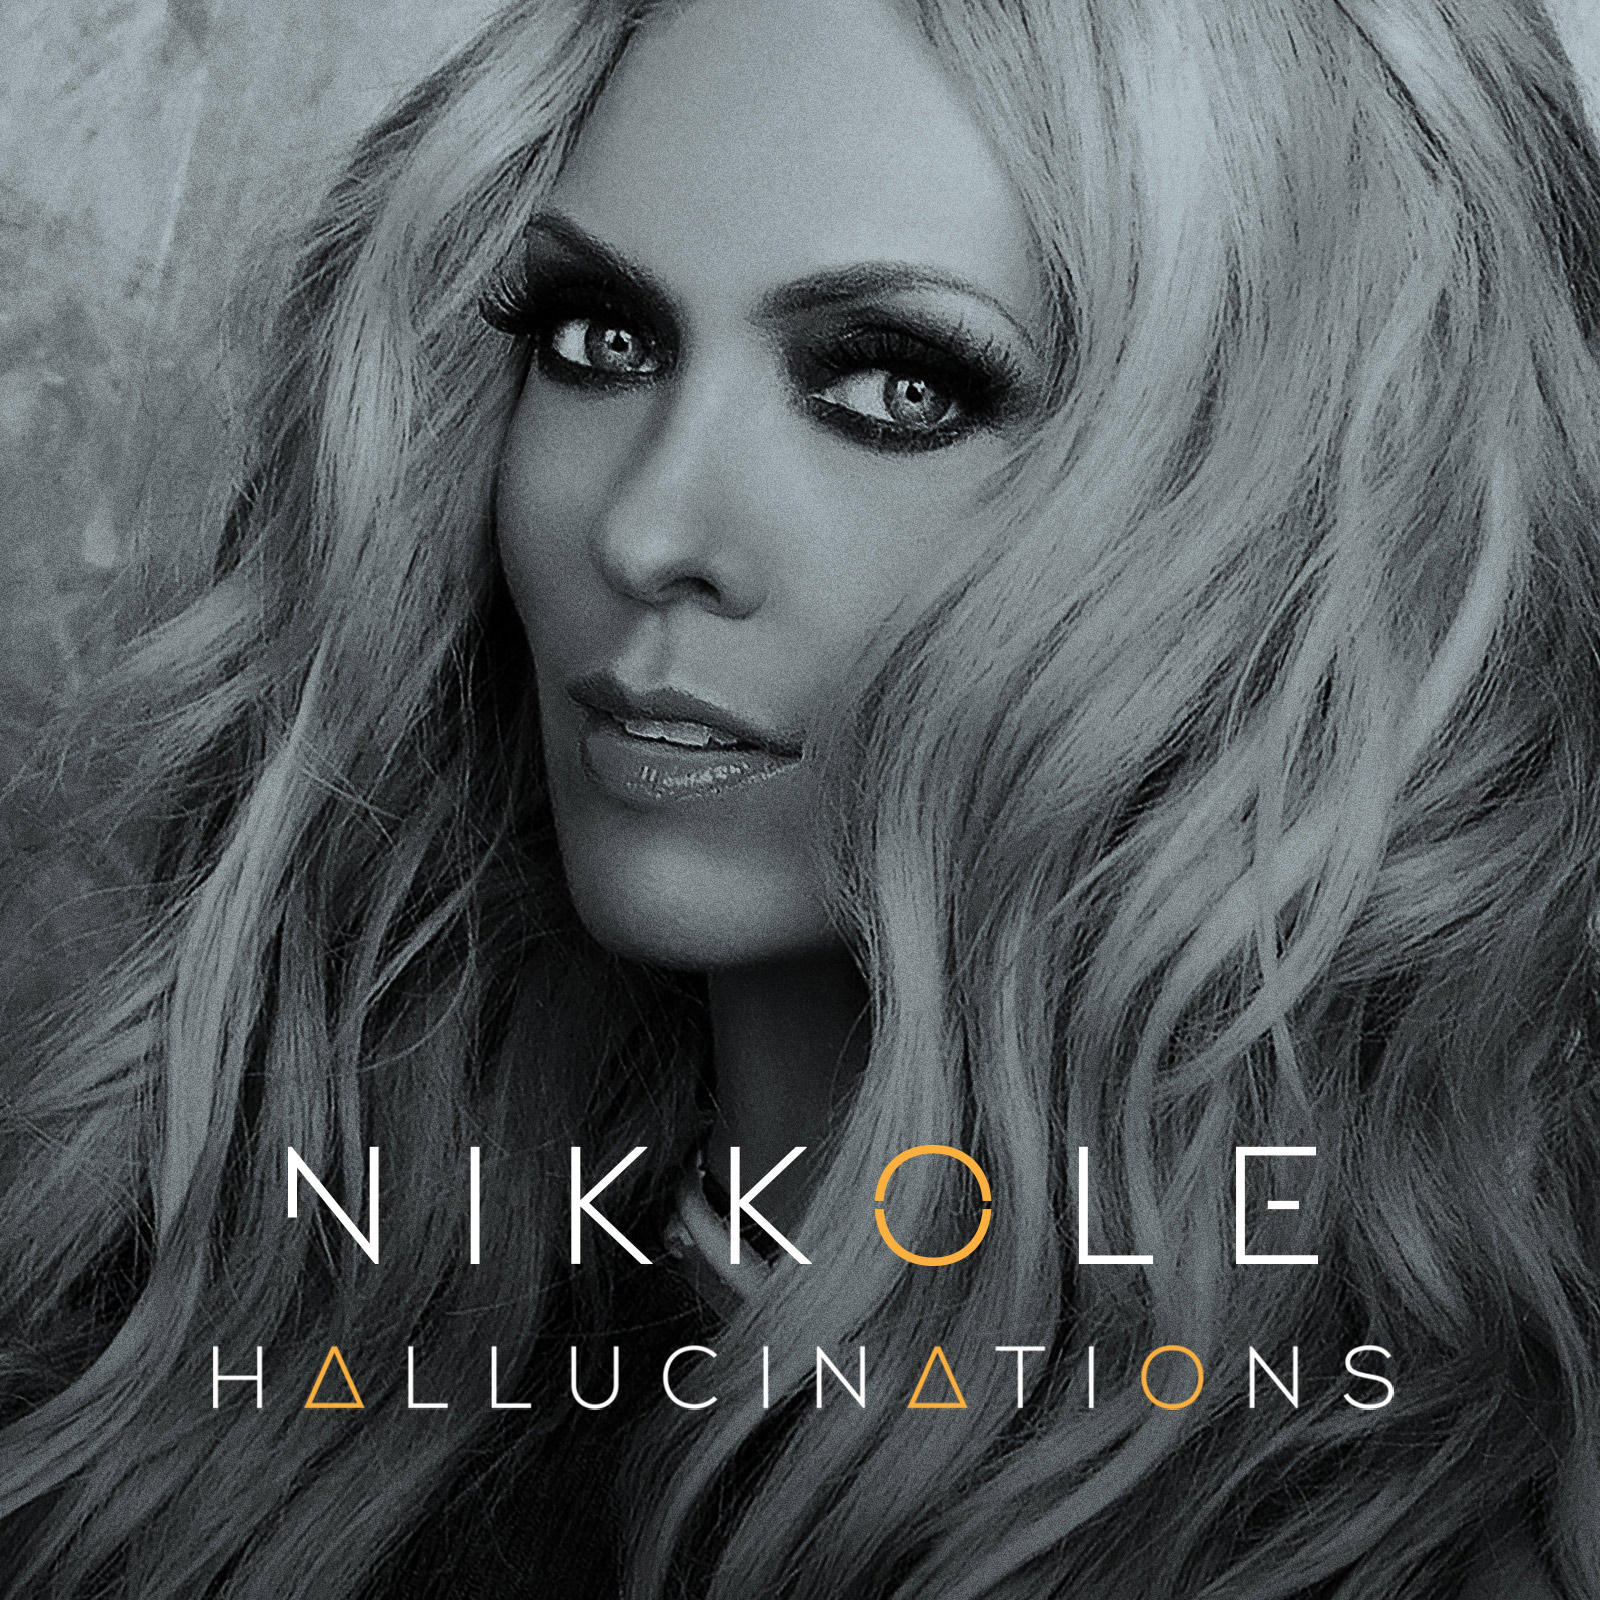 Nikkole’s “Hallucinations” Hits The Music Scene and Delivers Authority